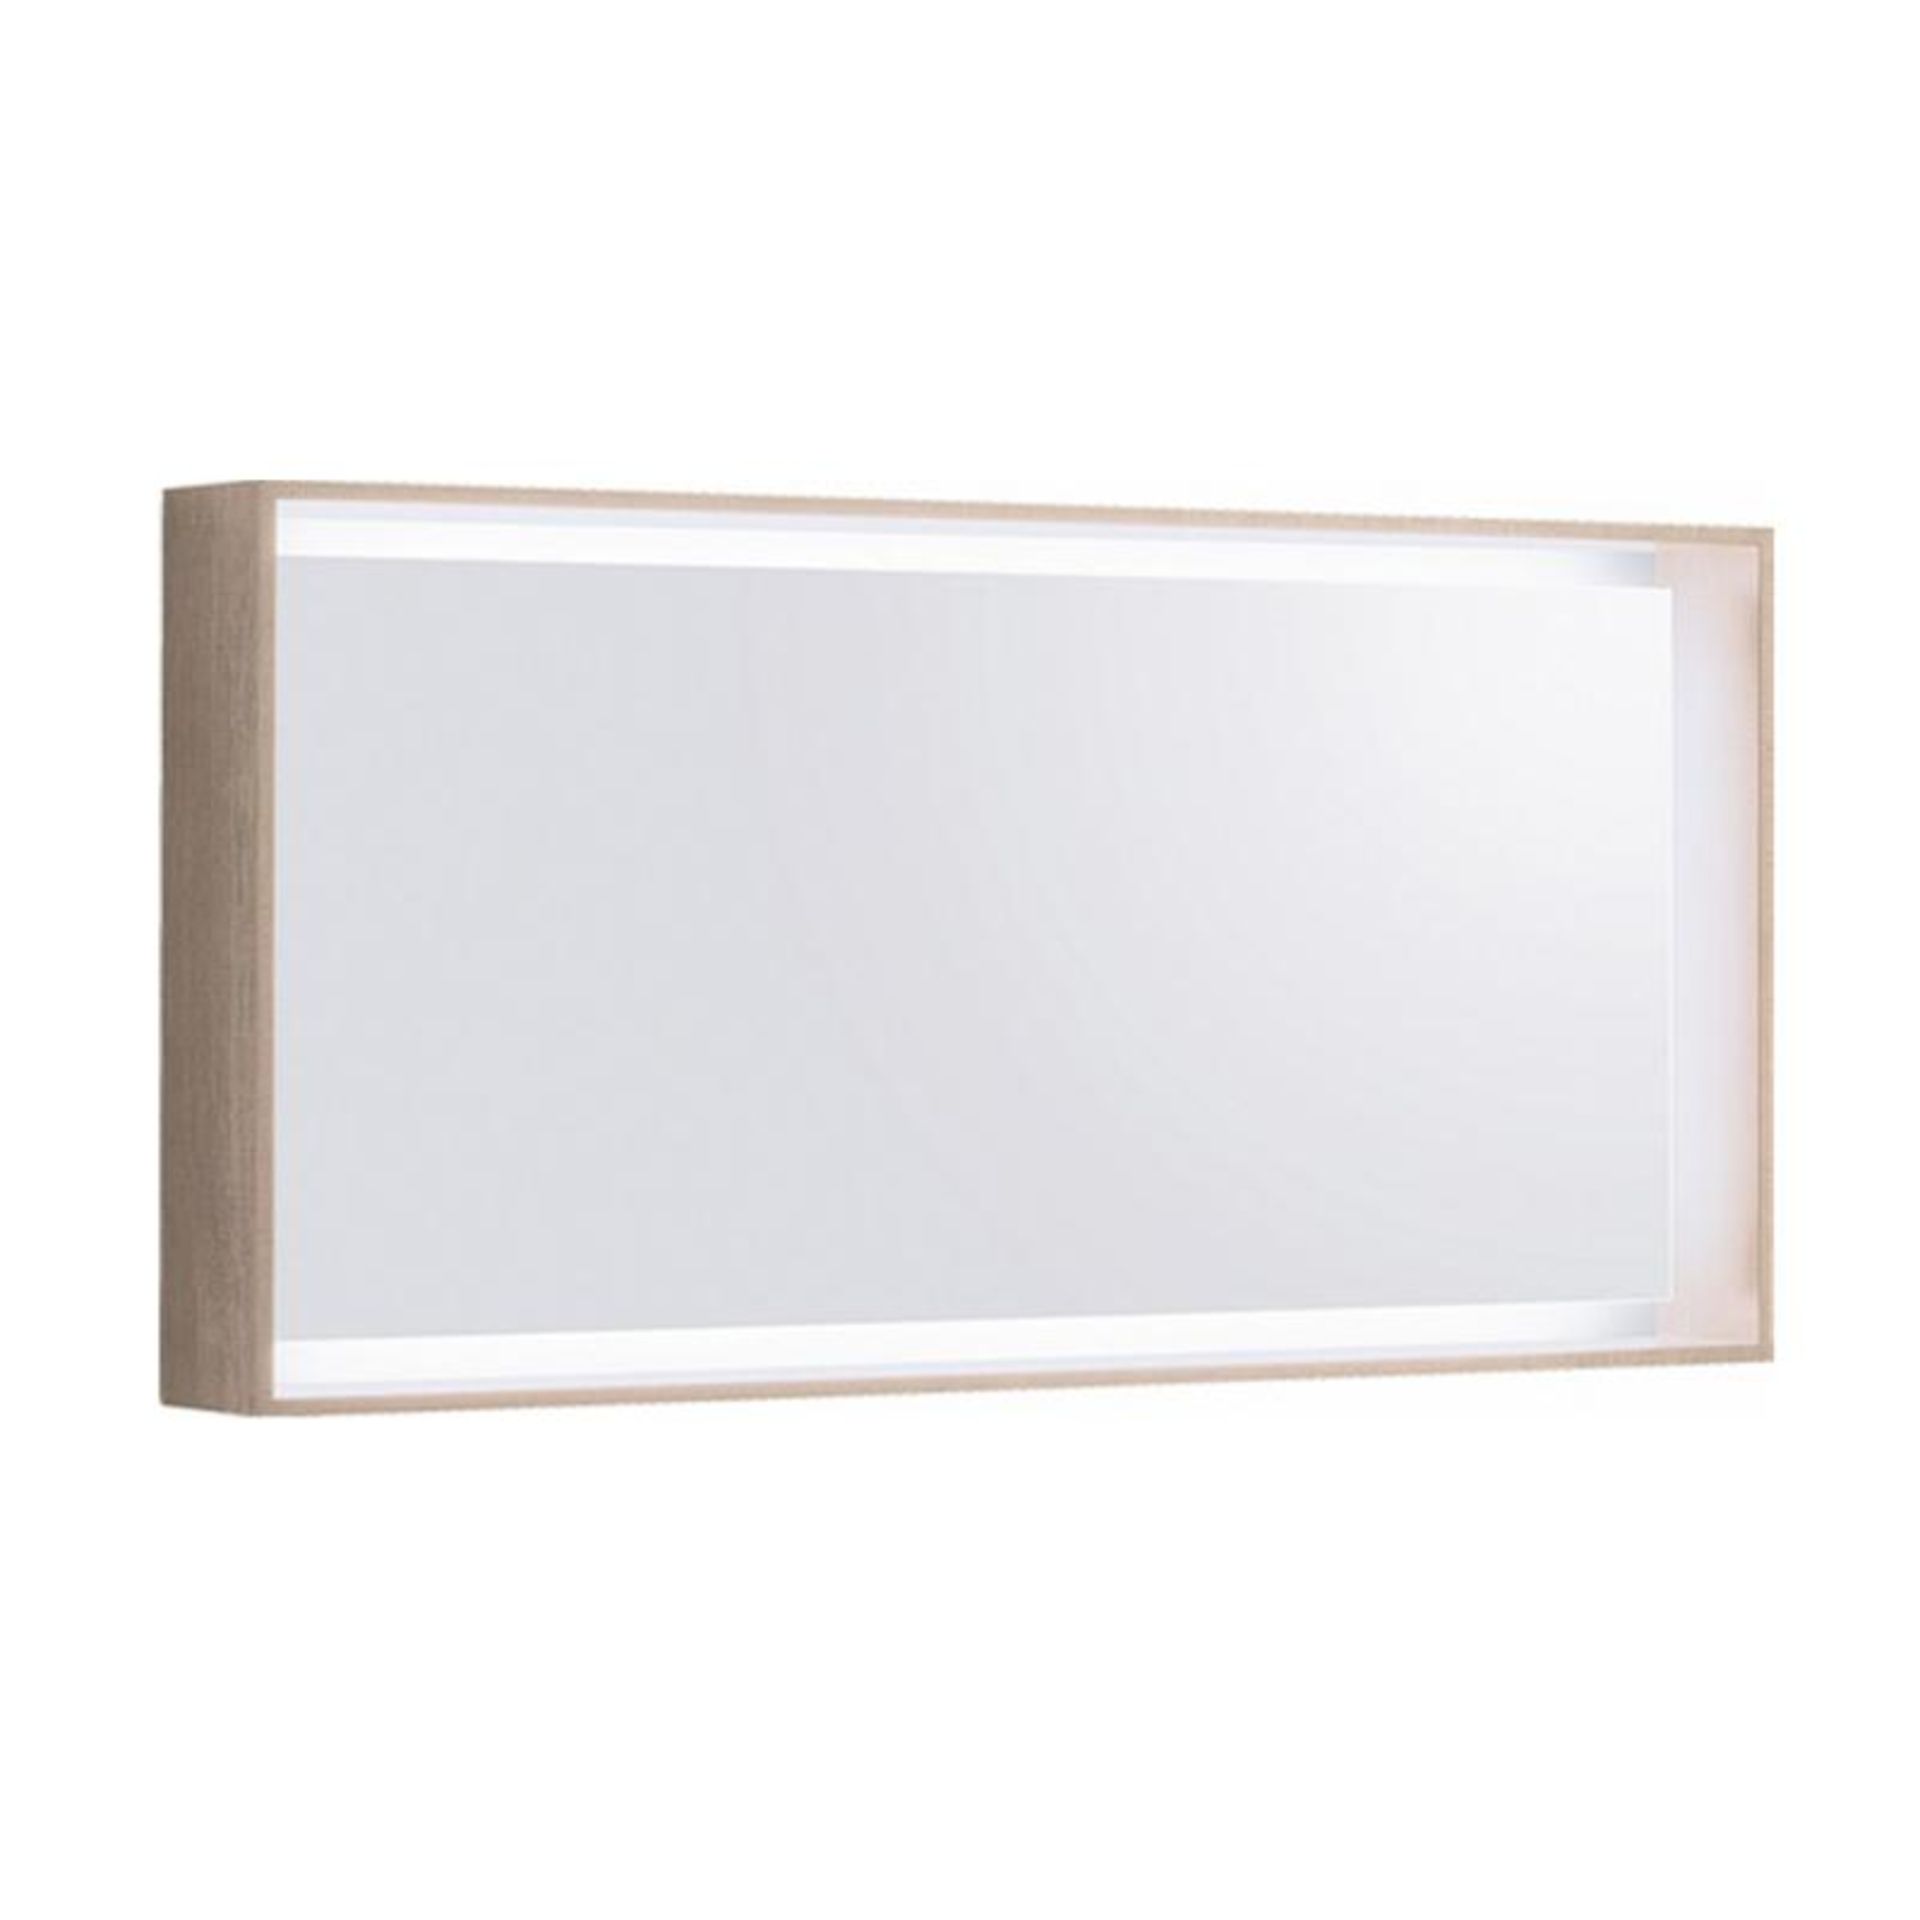 NEW (VD20) Keramag Citterio Natural Beige illuminated Mirror.RRP £687.99.If youre looking for ...